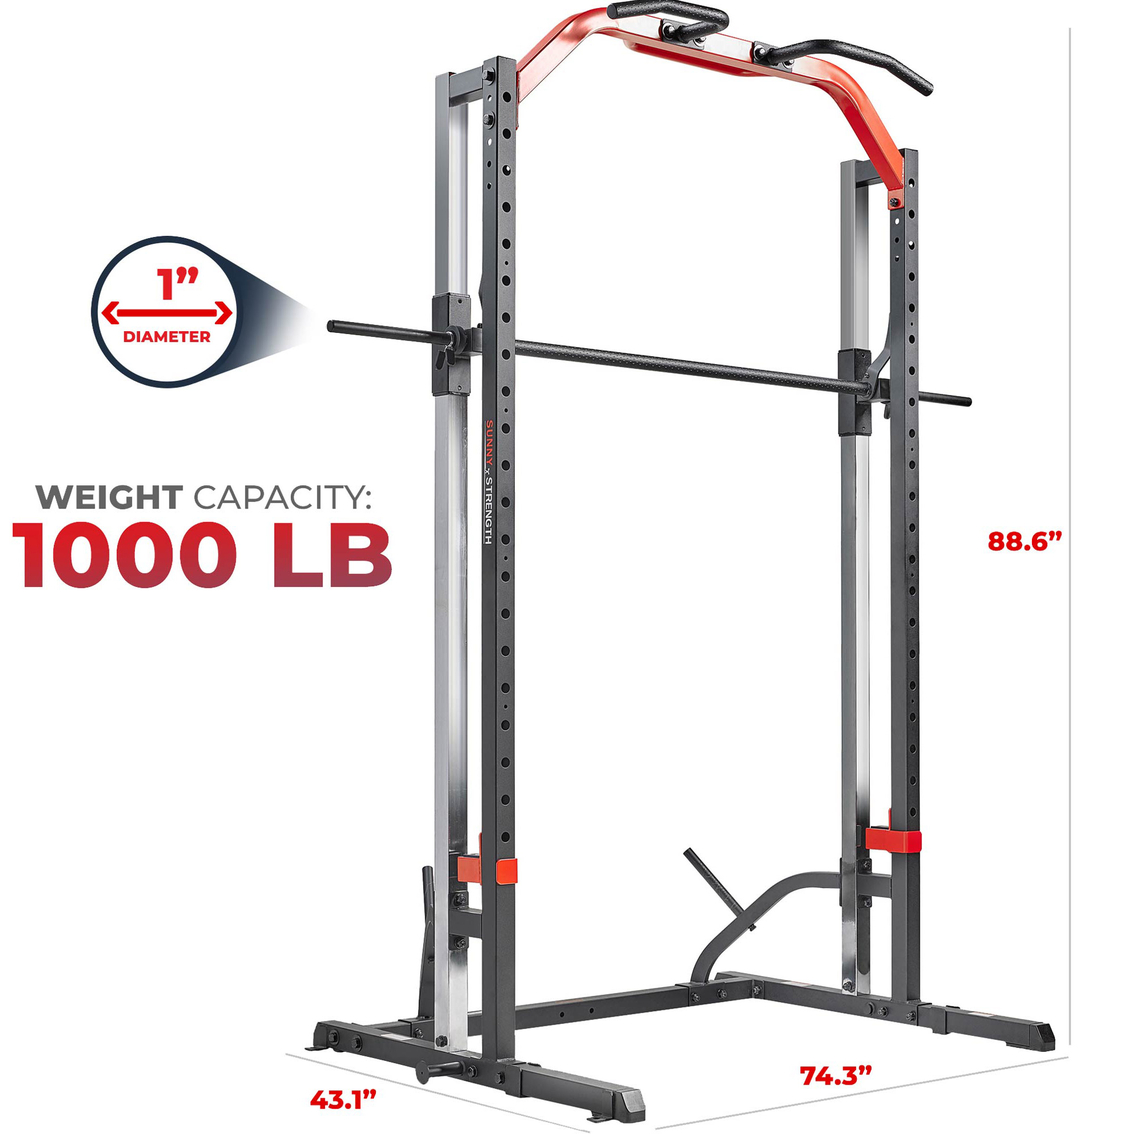 Sunny Health and Fitness Smith Machine Squat Rack - Image 3 of 10